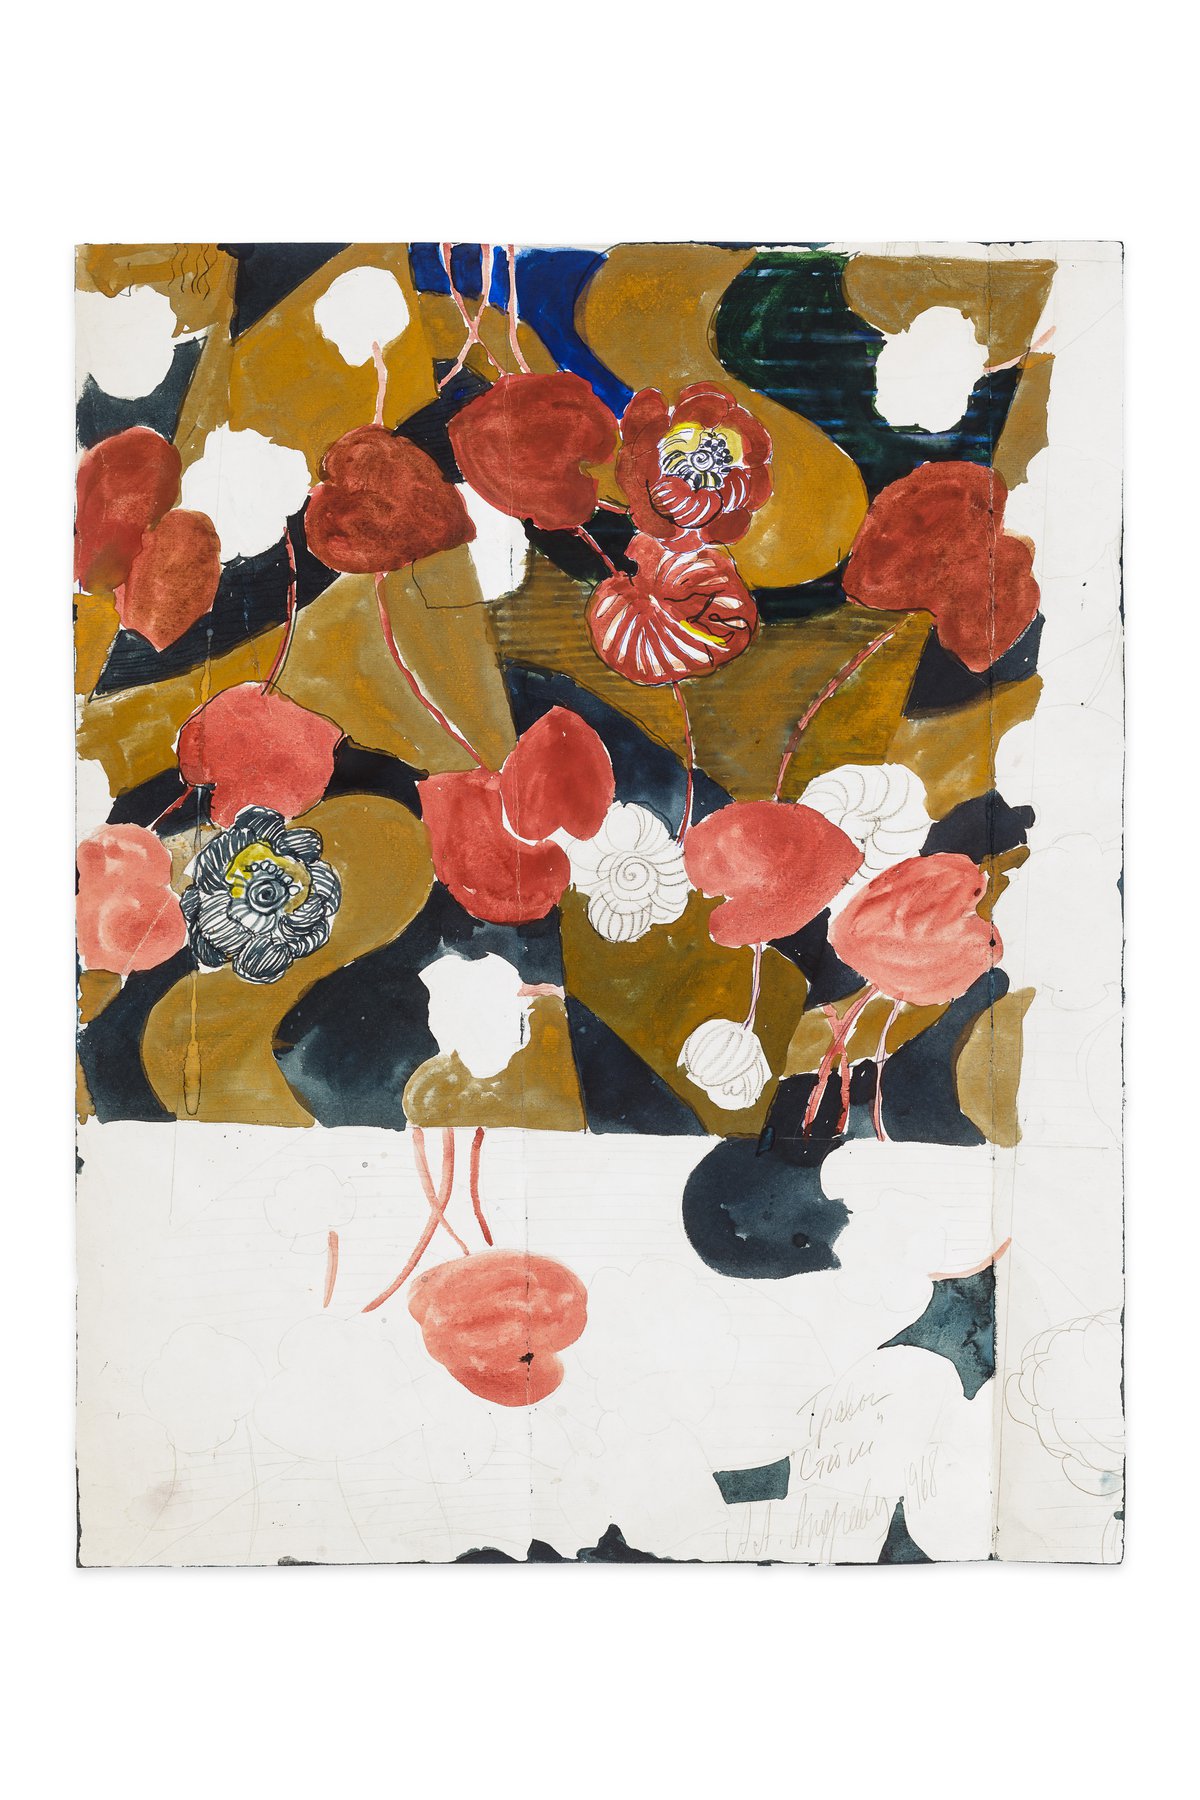 Anna AndreevaThe Herbs, 1968 (recto)Ink, gouache and pencil on paper54,5 x 43 cm